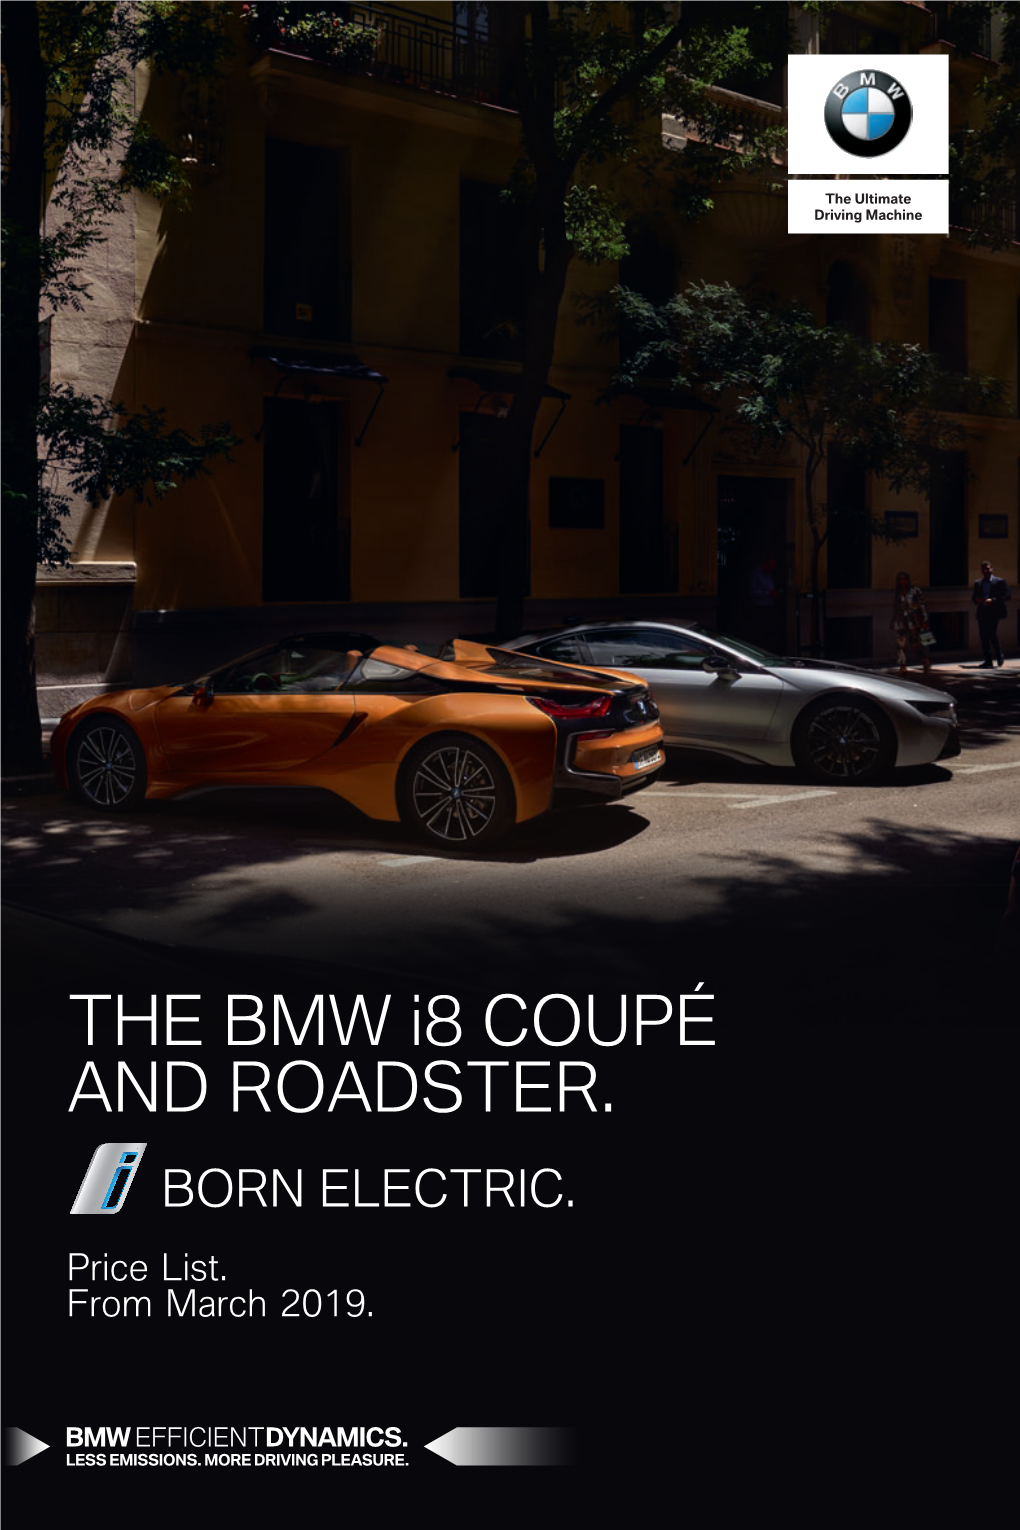 THE BMW I8 COUPÉ and ROADSTER. BORN ELECTRIC